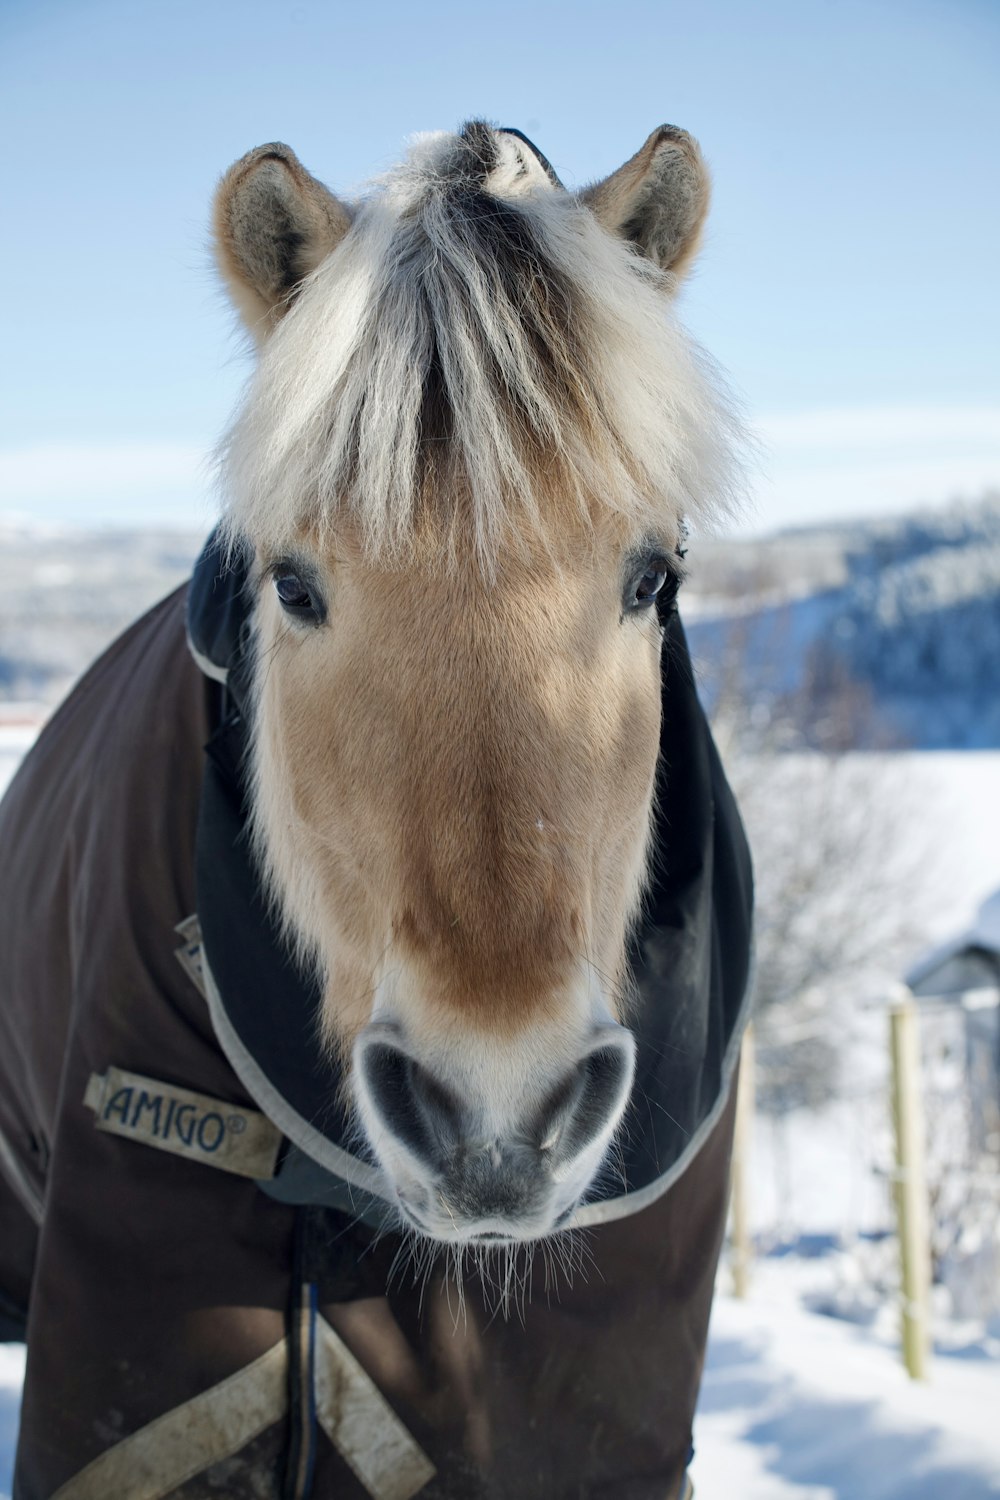 a horse wearing a jacket in the snow